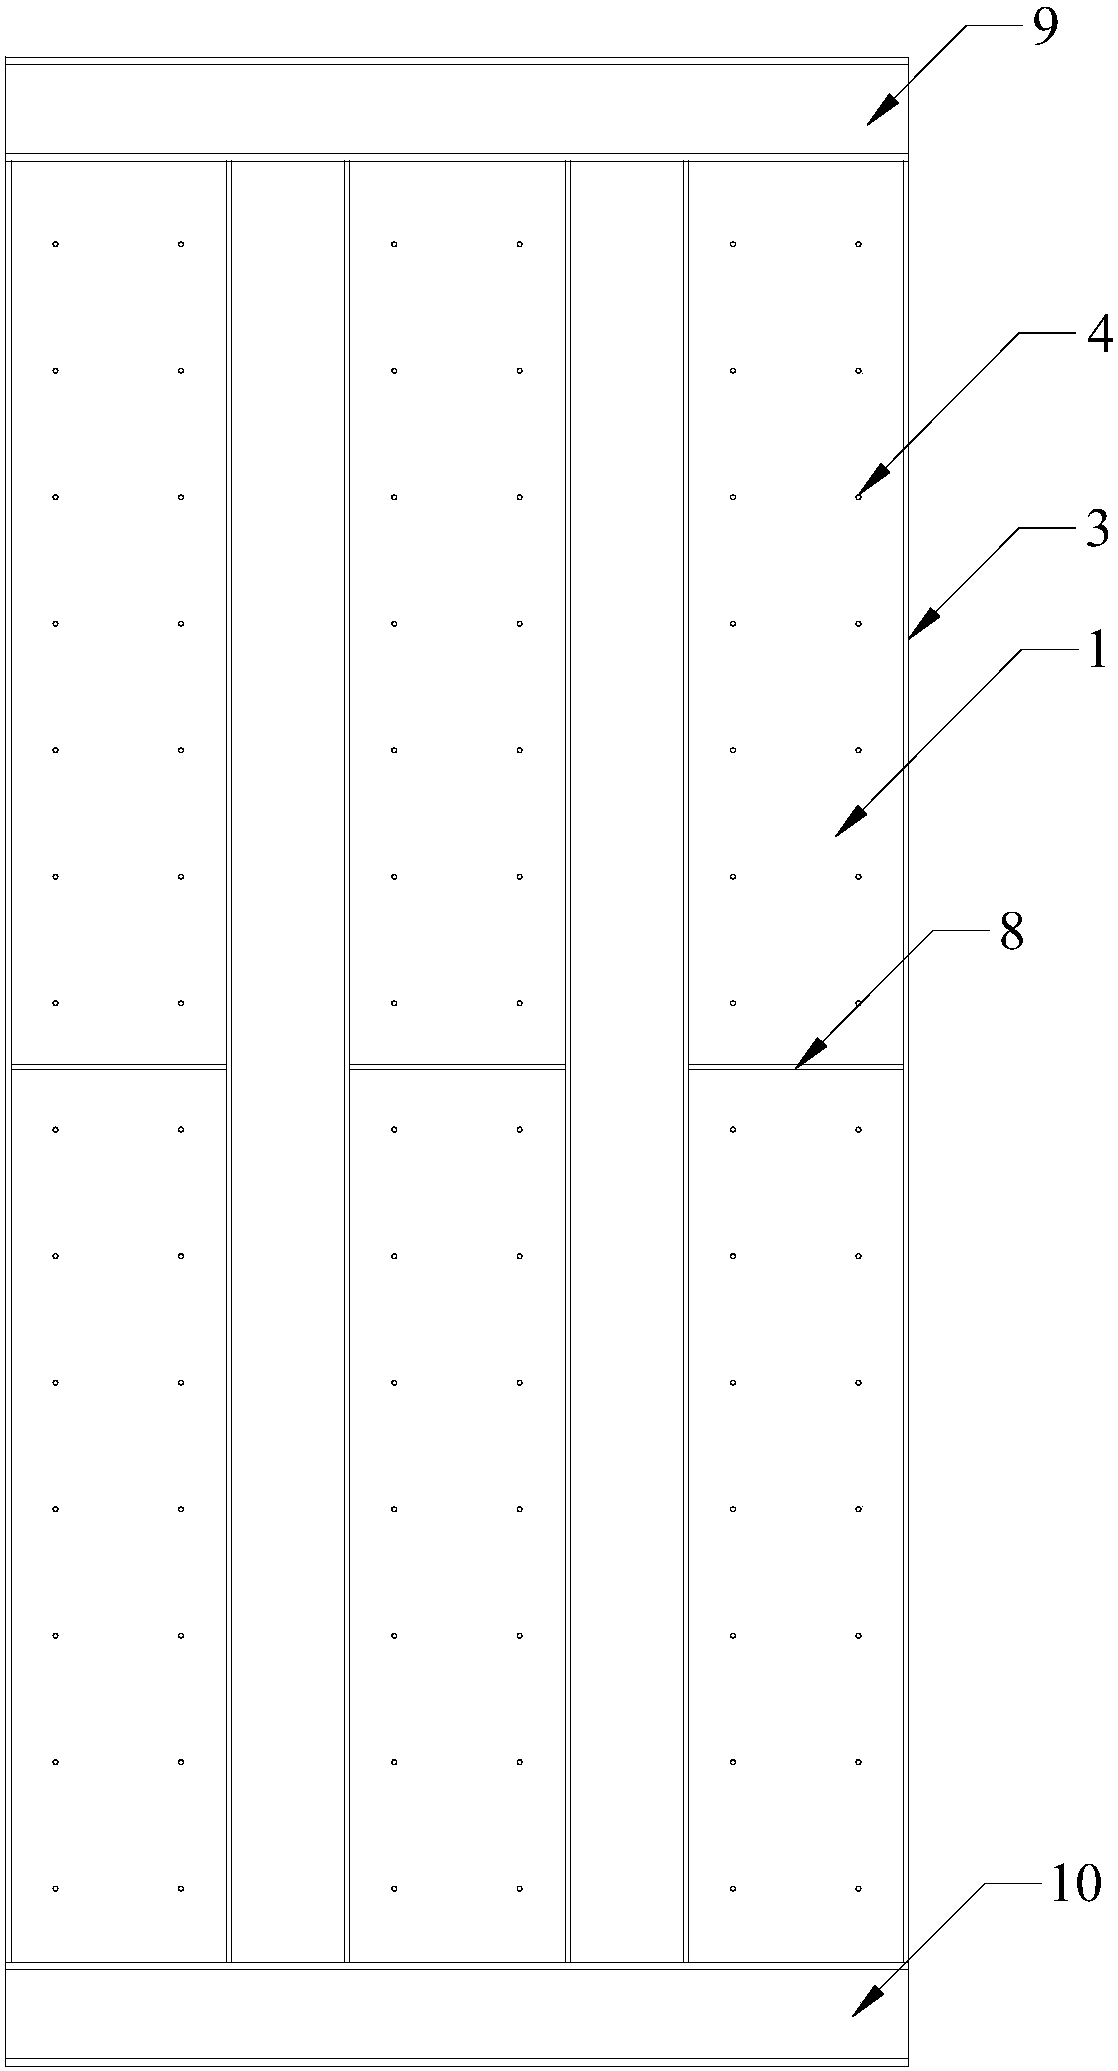 A built-in segmented steel plate-high-strength concrete composite shear wall and its construction method